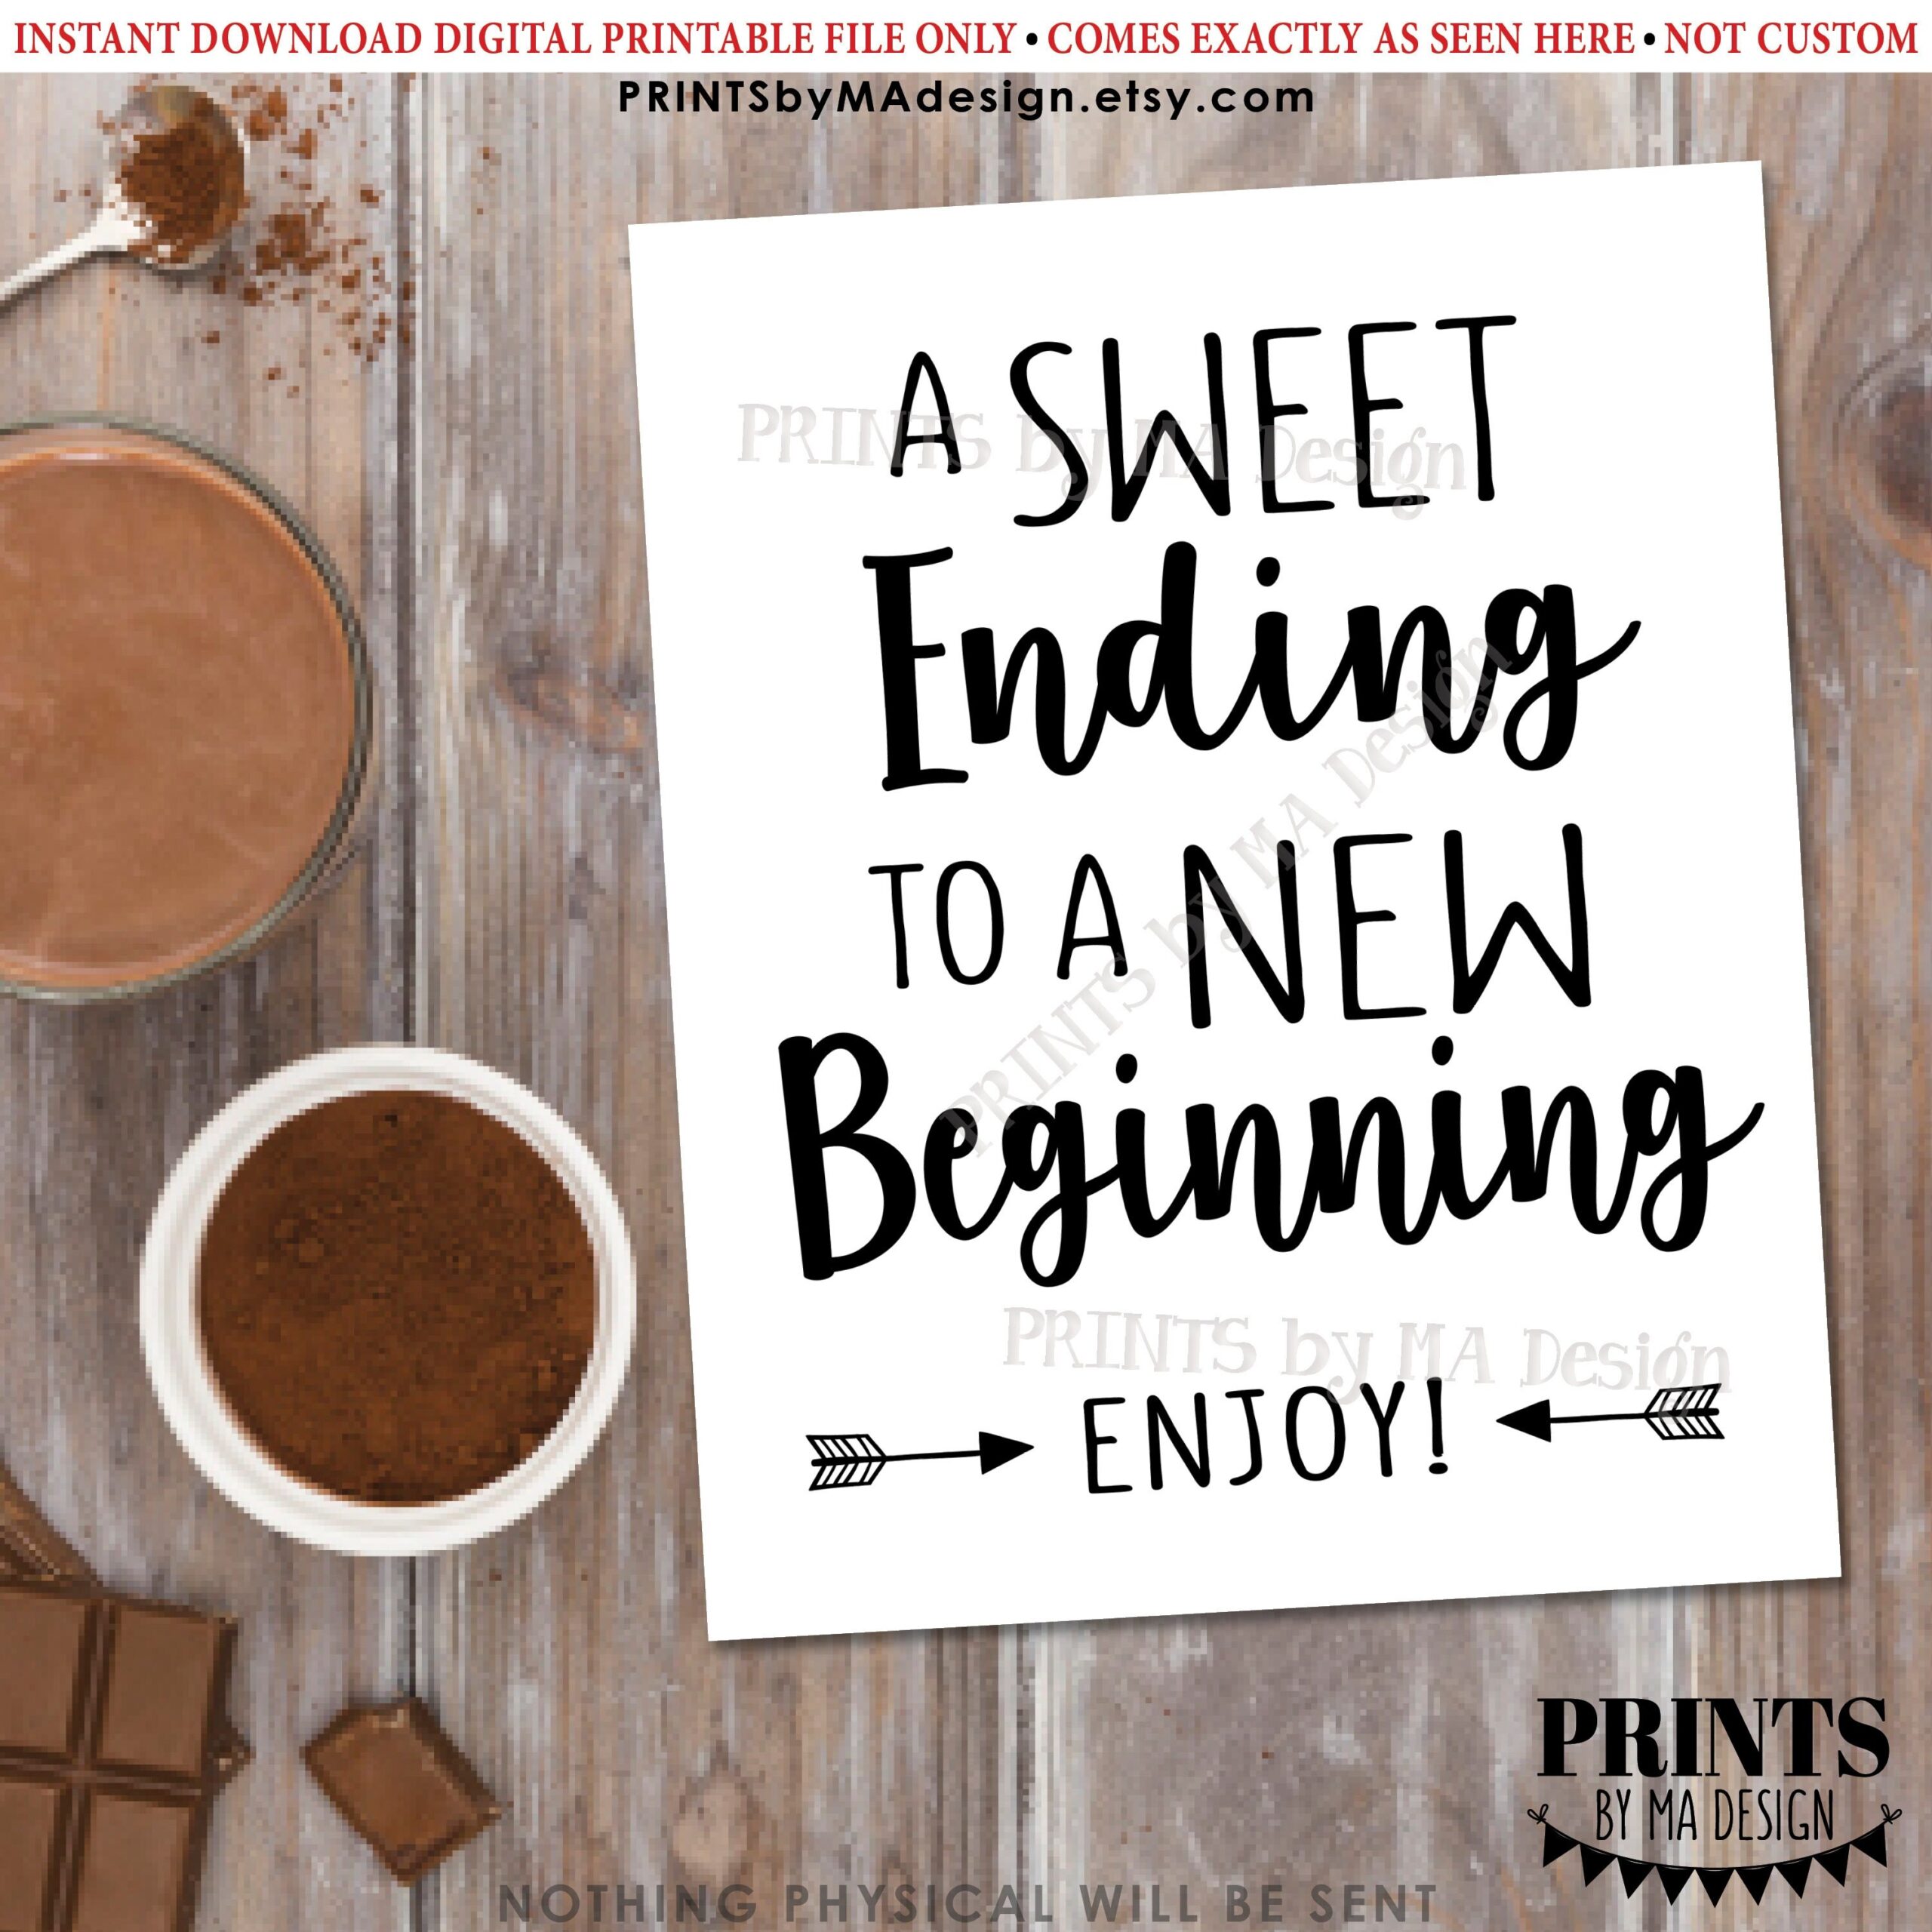 A Sweet Ending To A New Beginning Graduation Free Printable